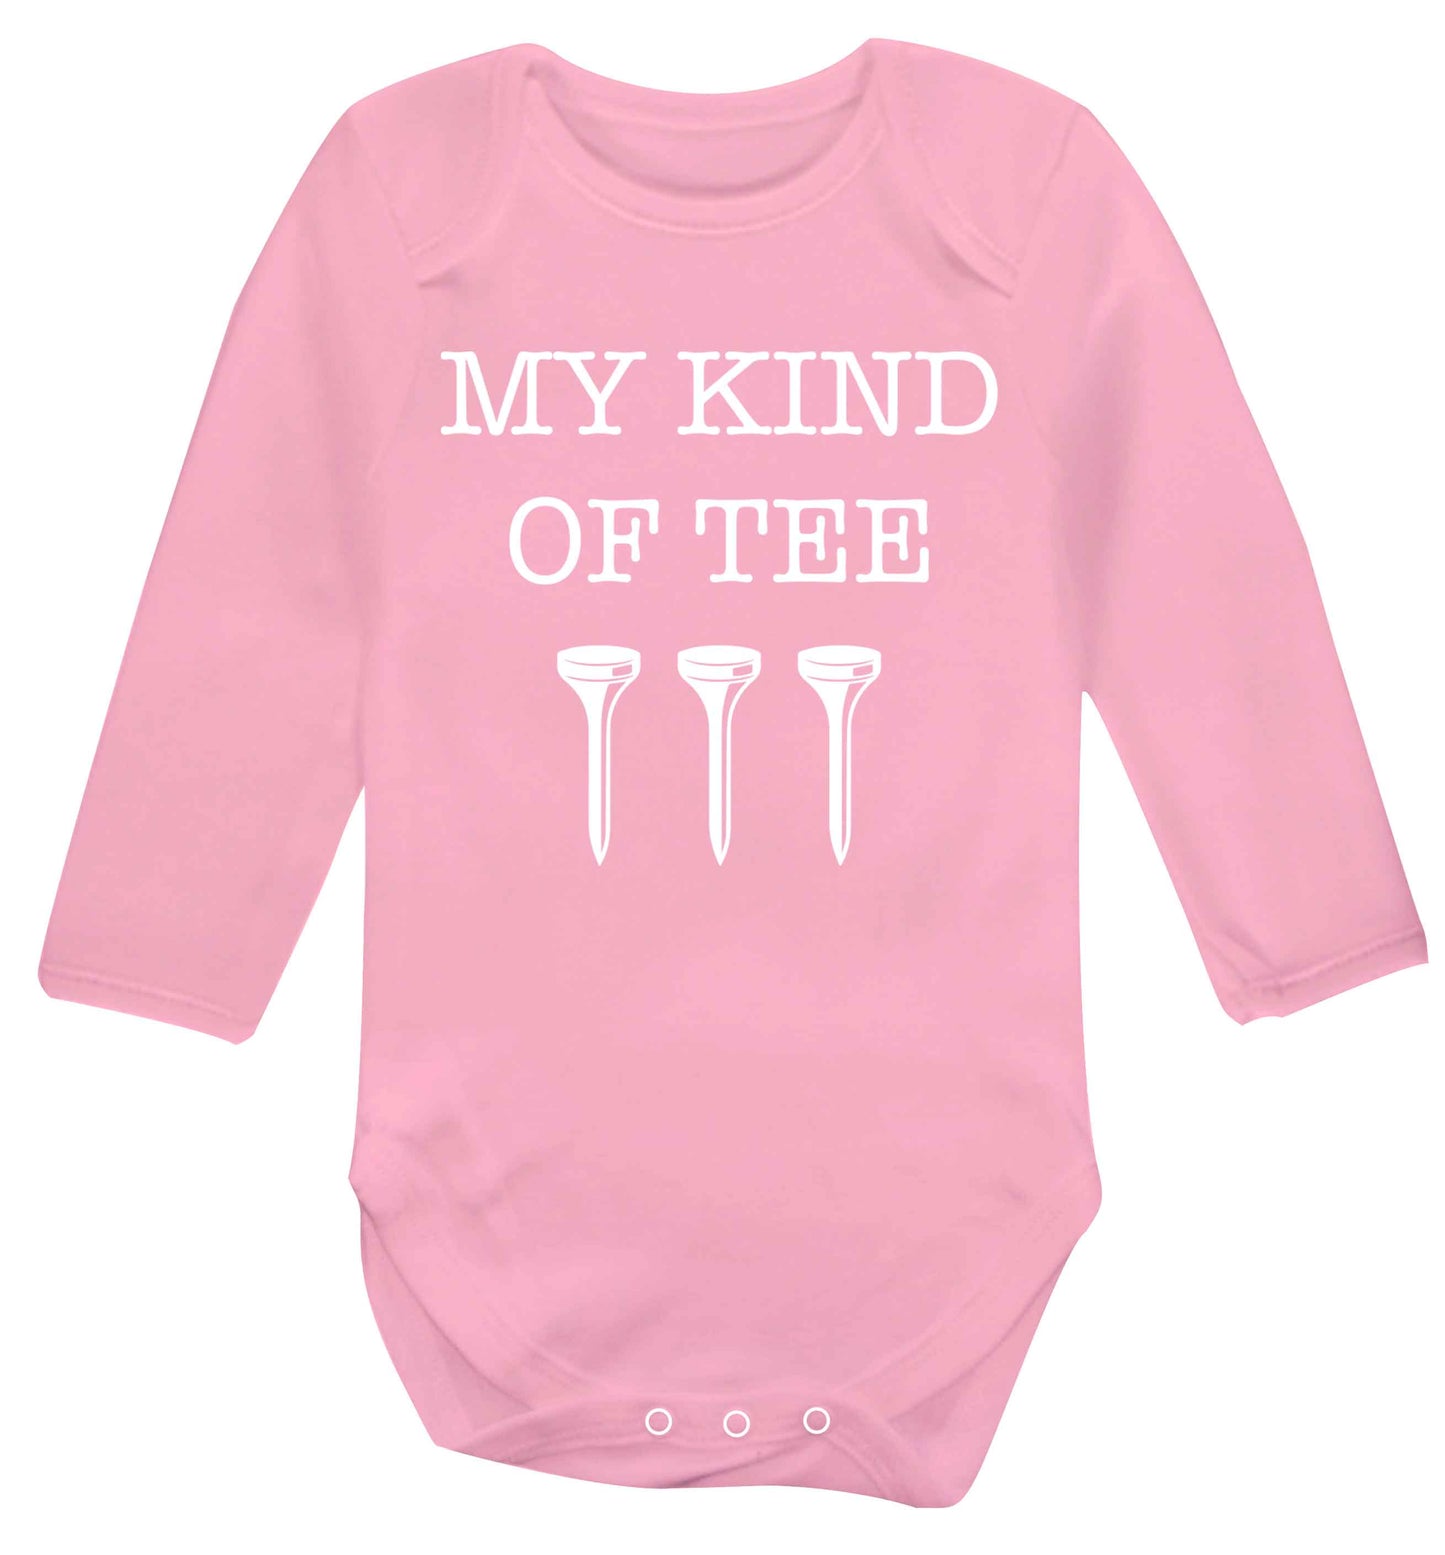 My kind of tee Baby Vest long sleeved pale pink 6-12 months